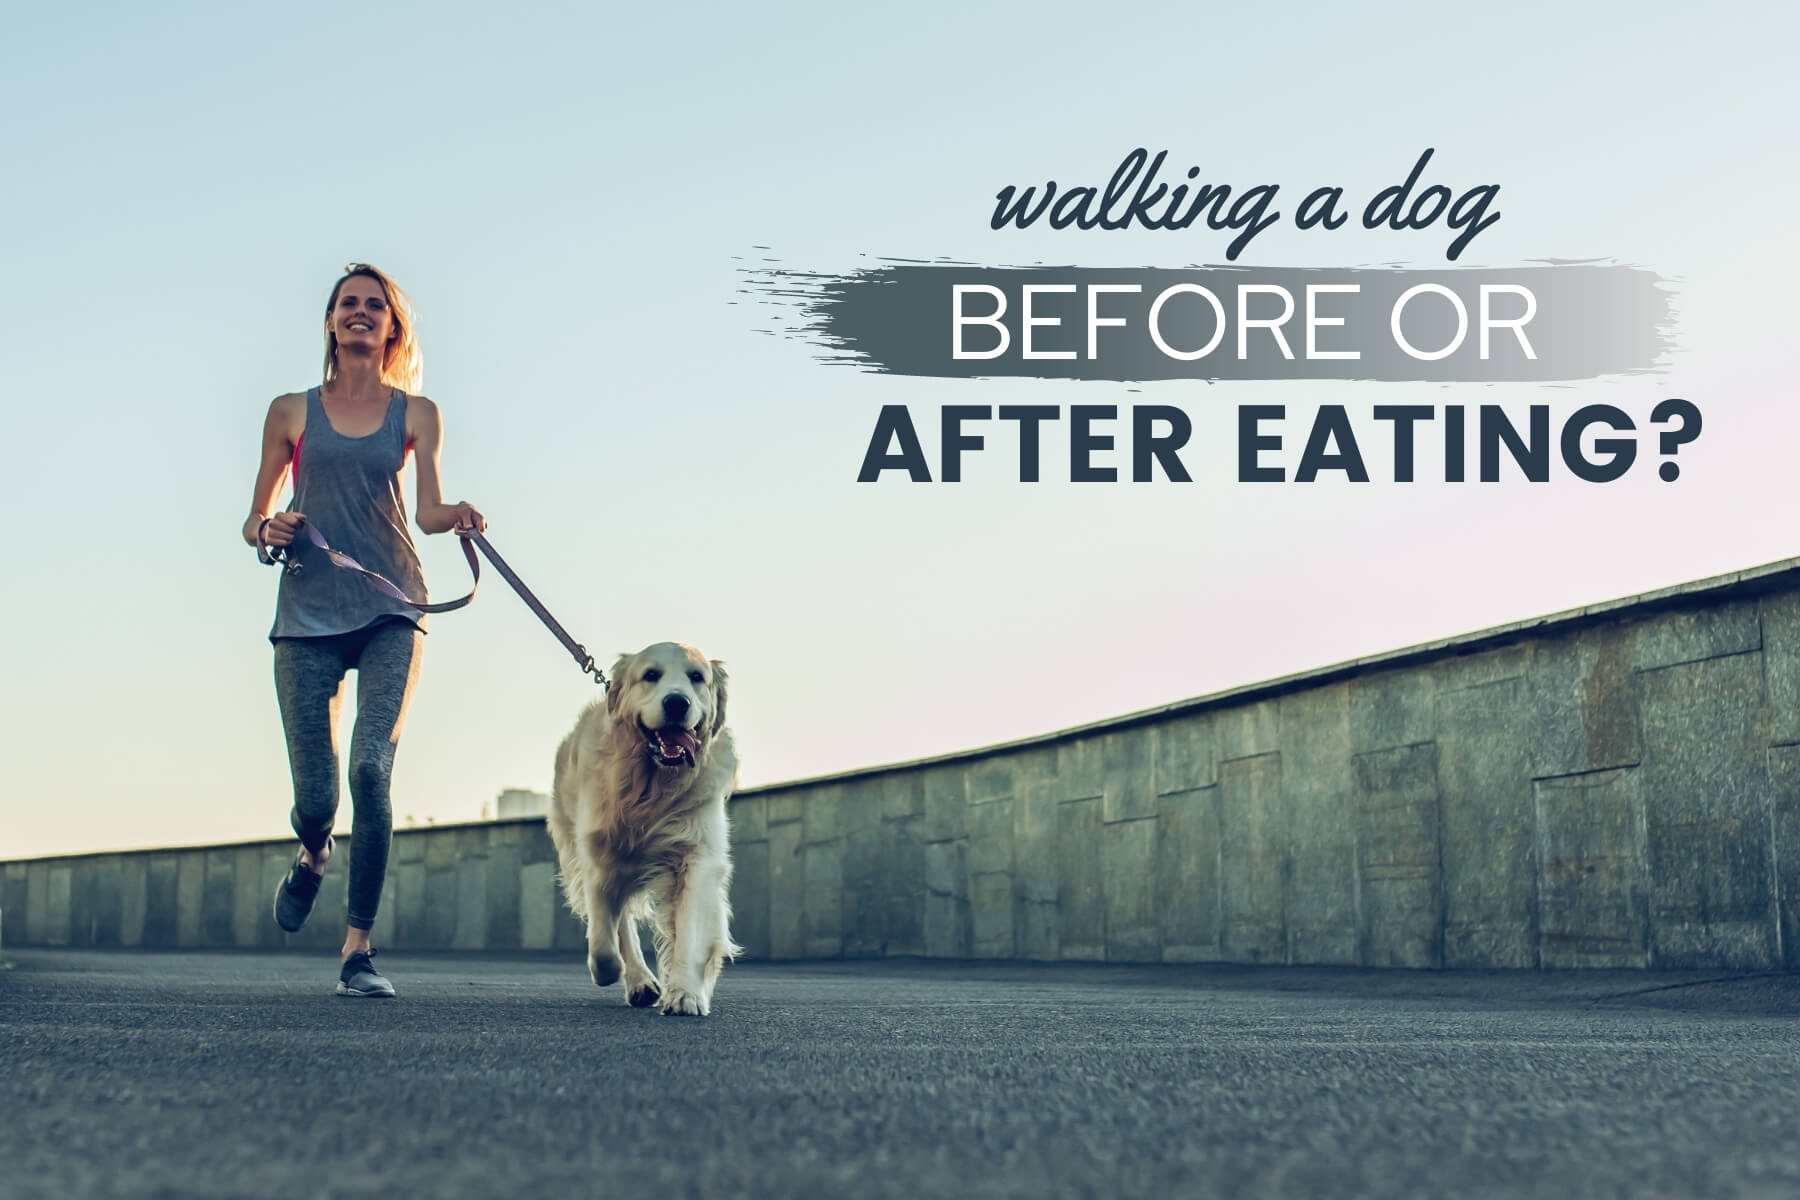 Walking A Dog Before or After Eating: Risks, Benefits & More - Canine Bible